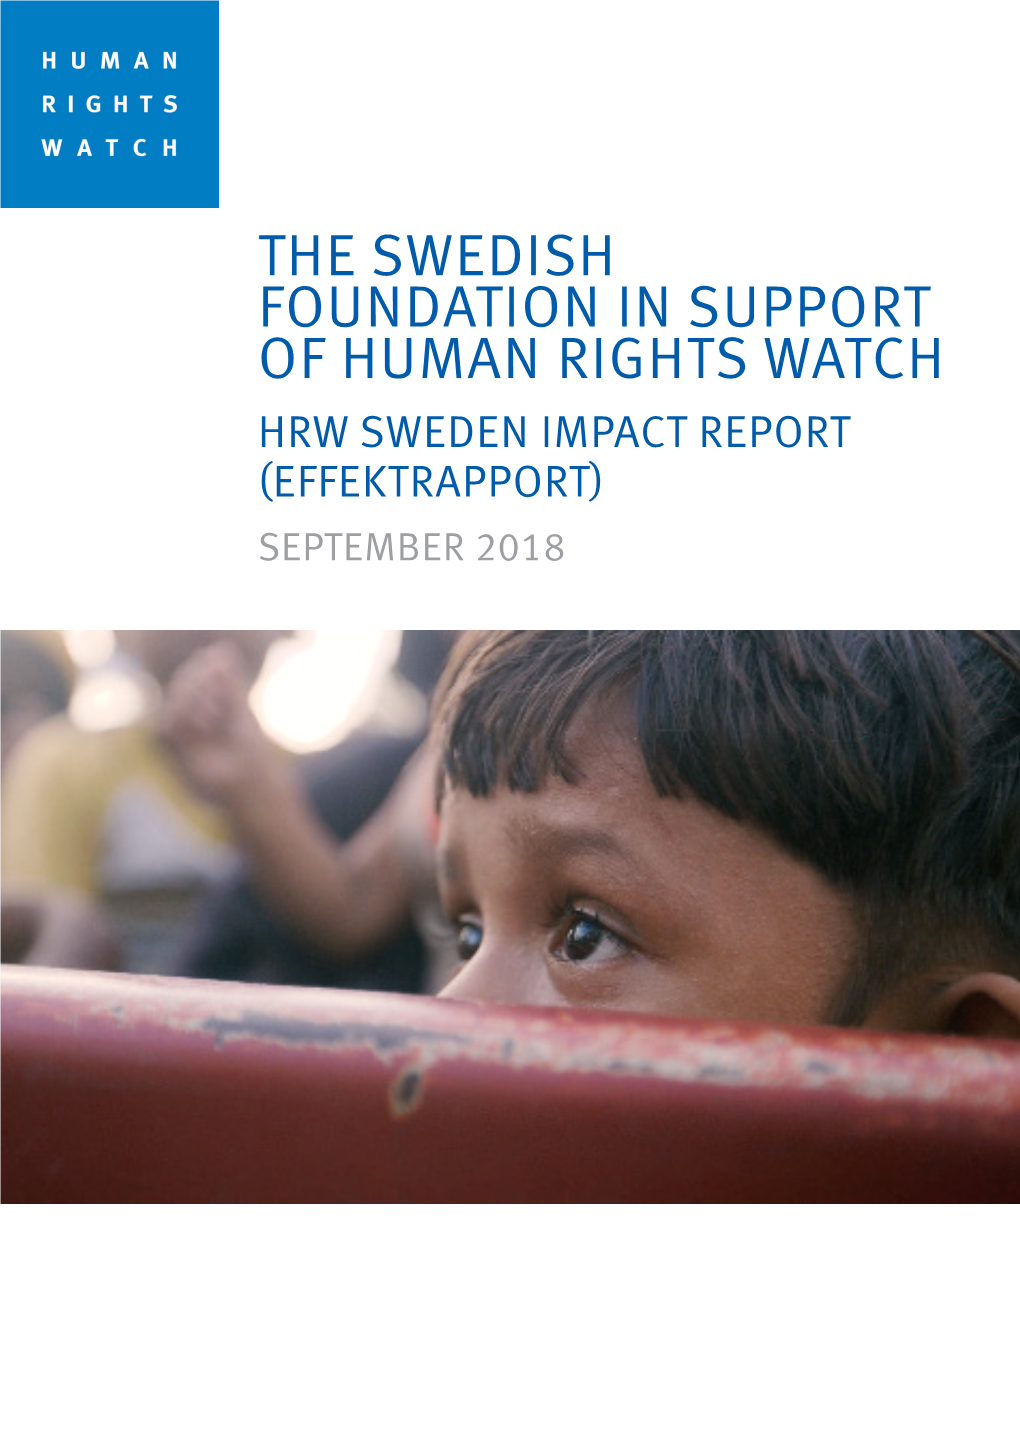 The Swedish Foundation in Support of Human Rights